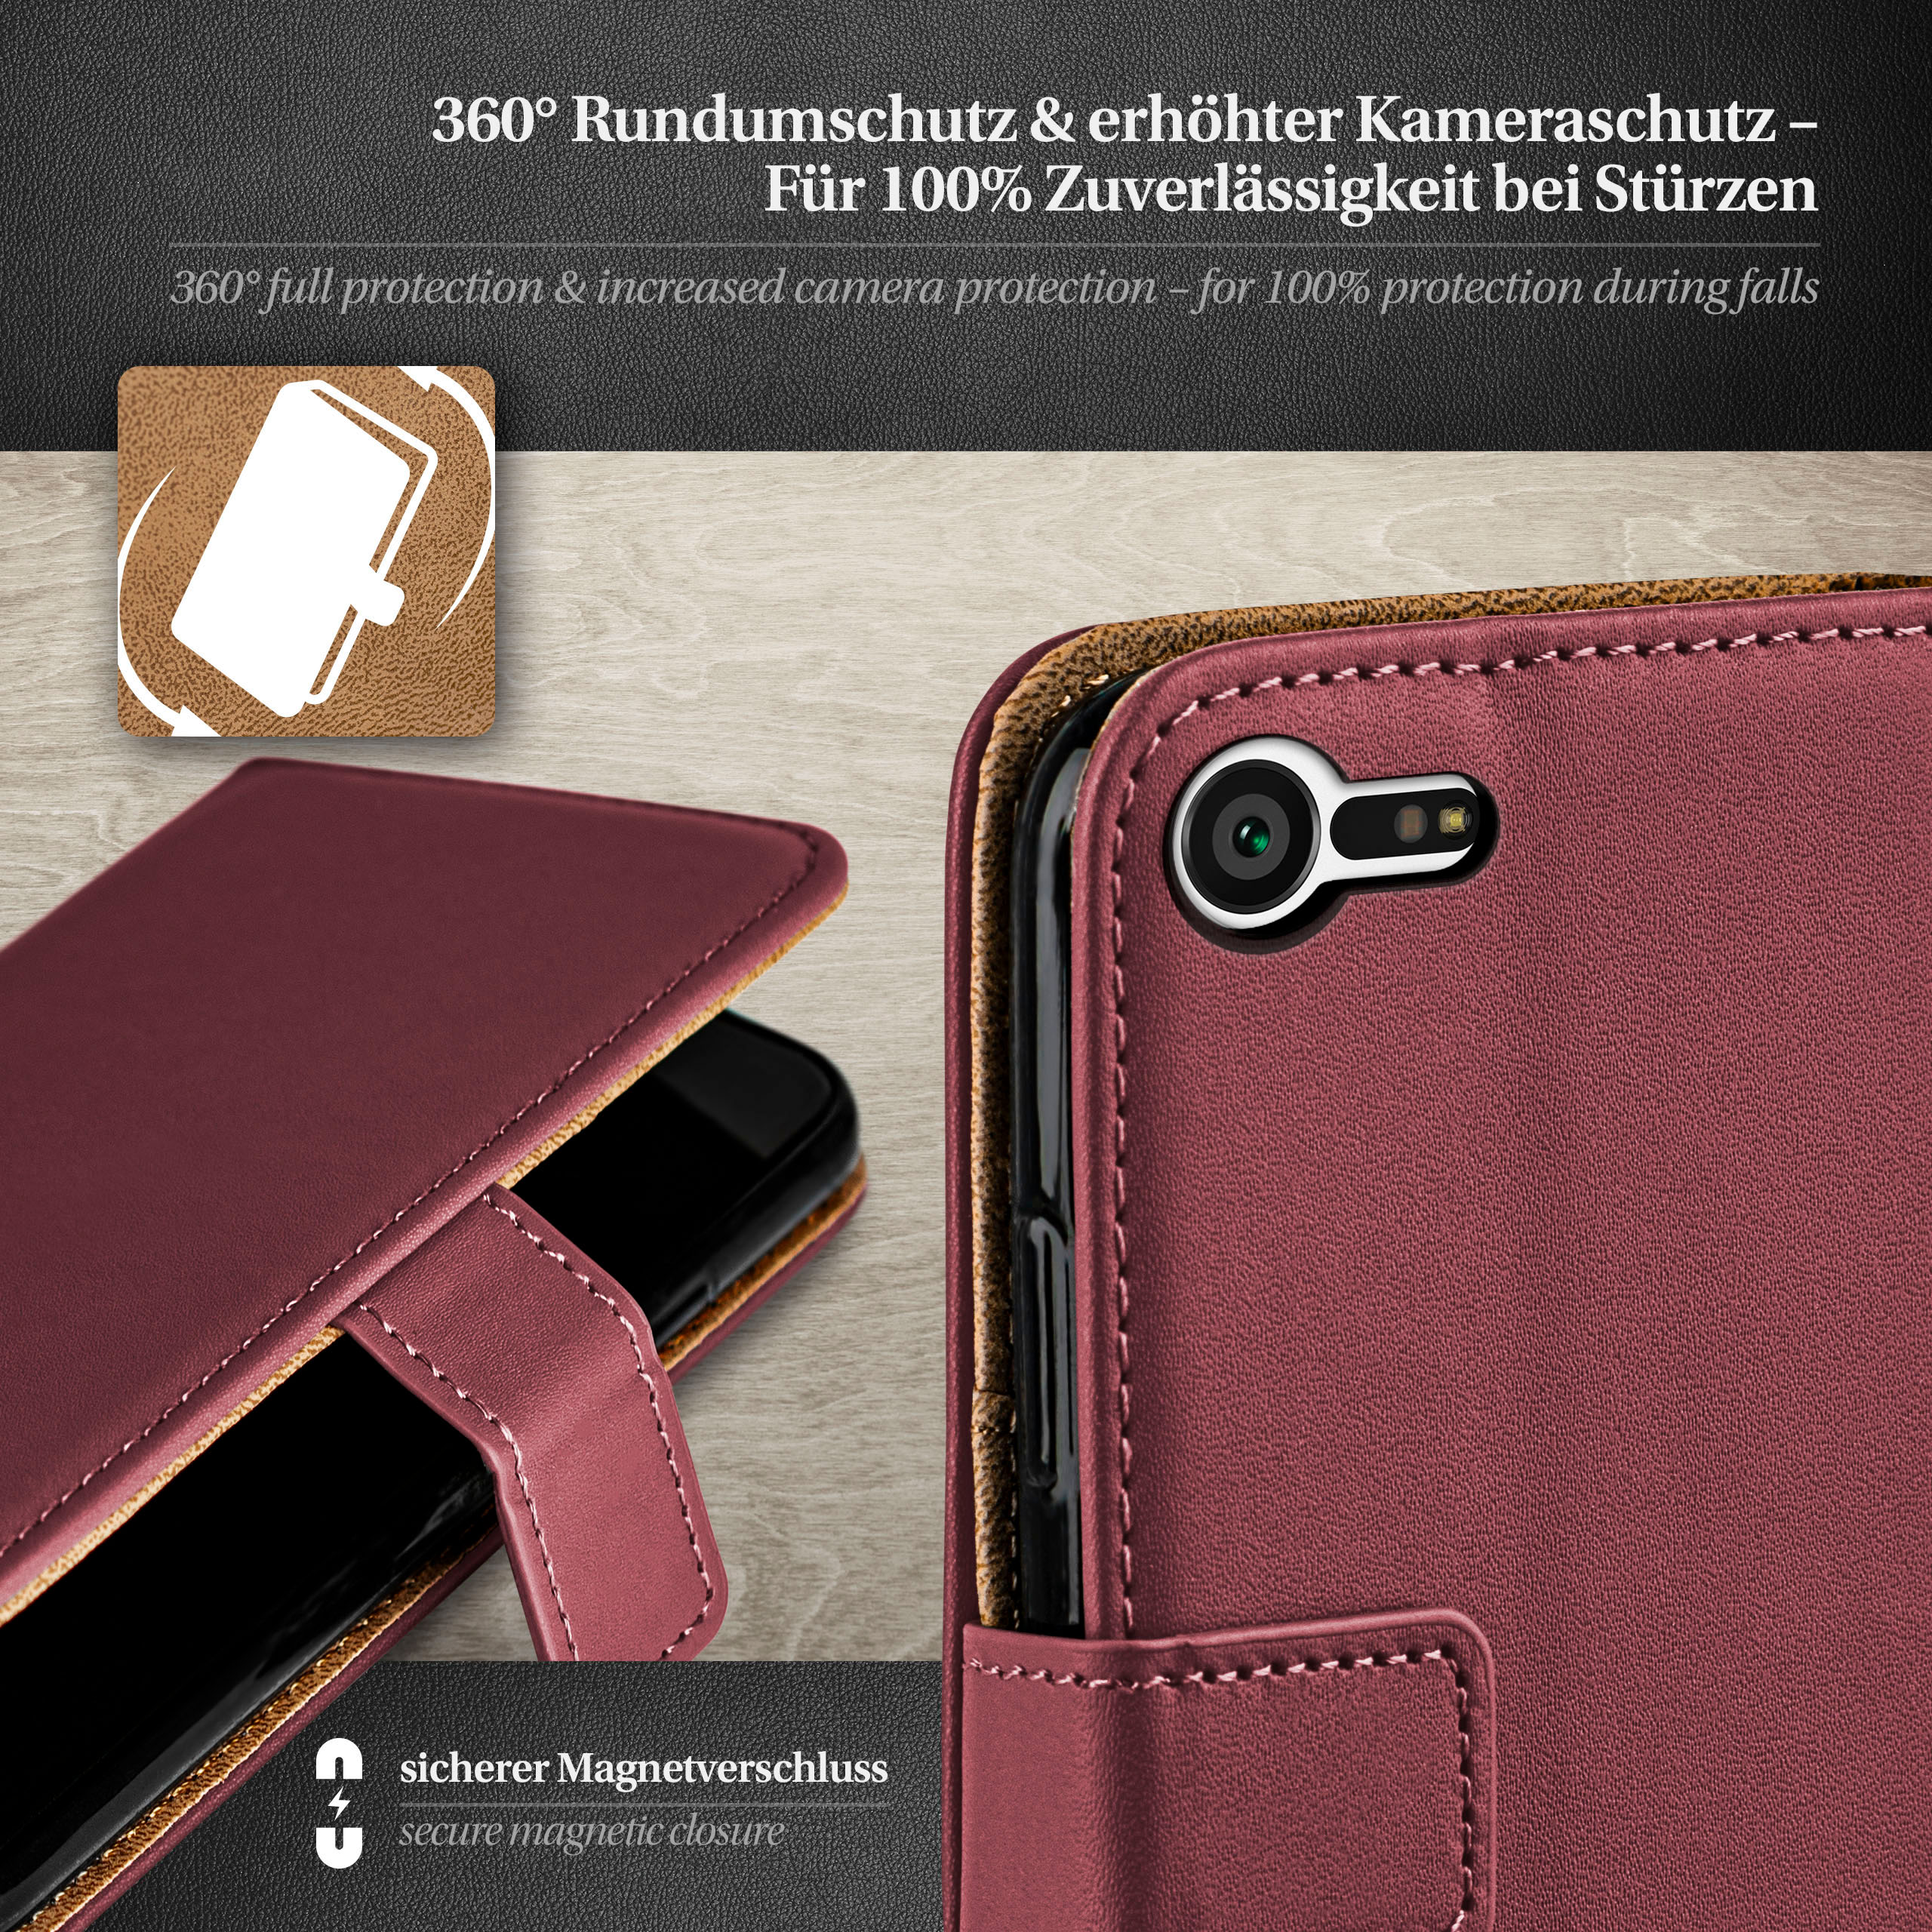 MOEX Book Maroon-Red Case, Xperia X Compact, Sony, Bookcover